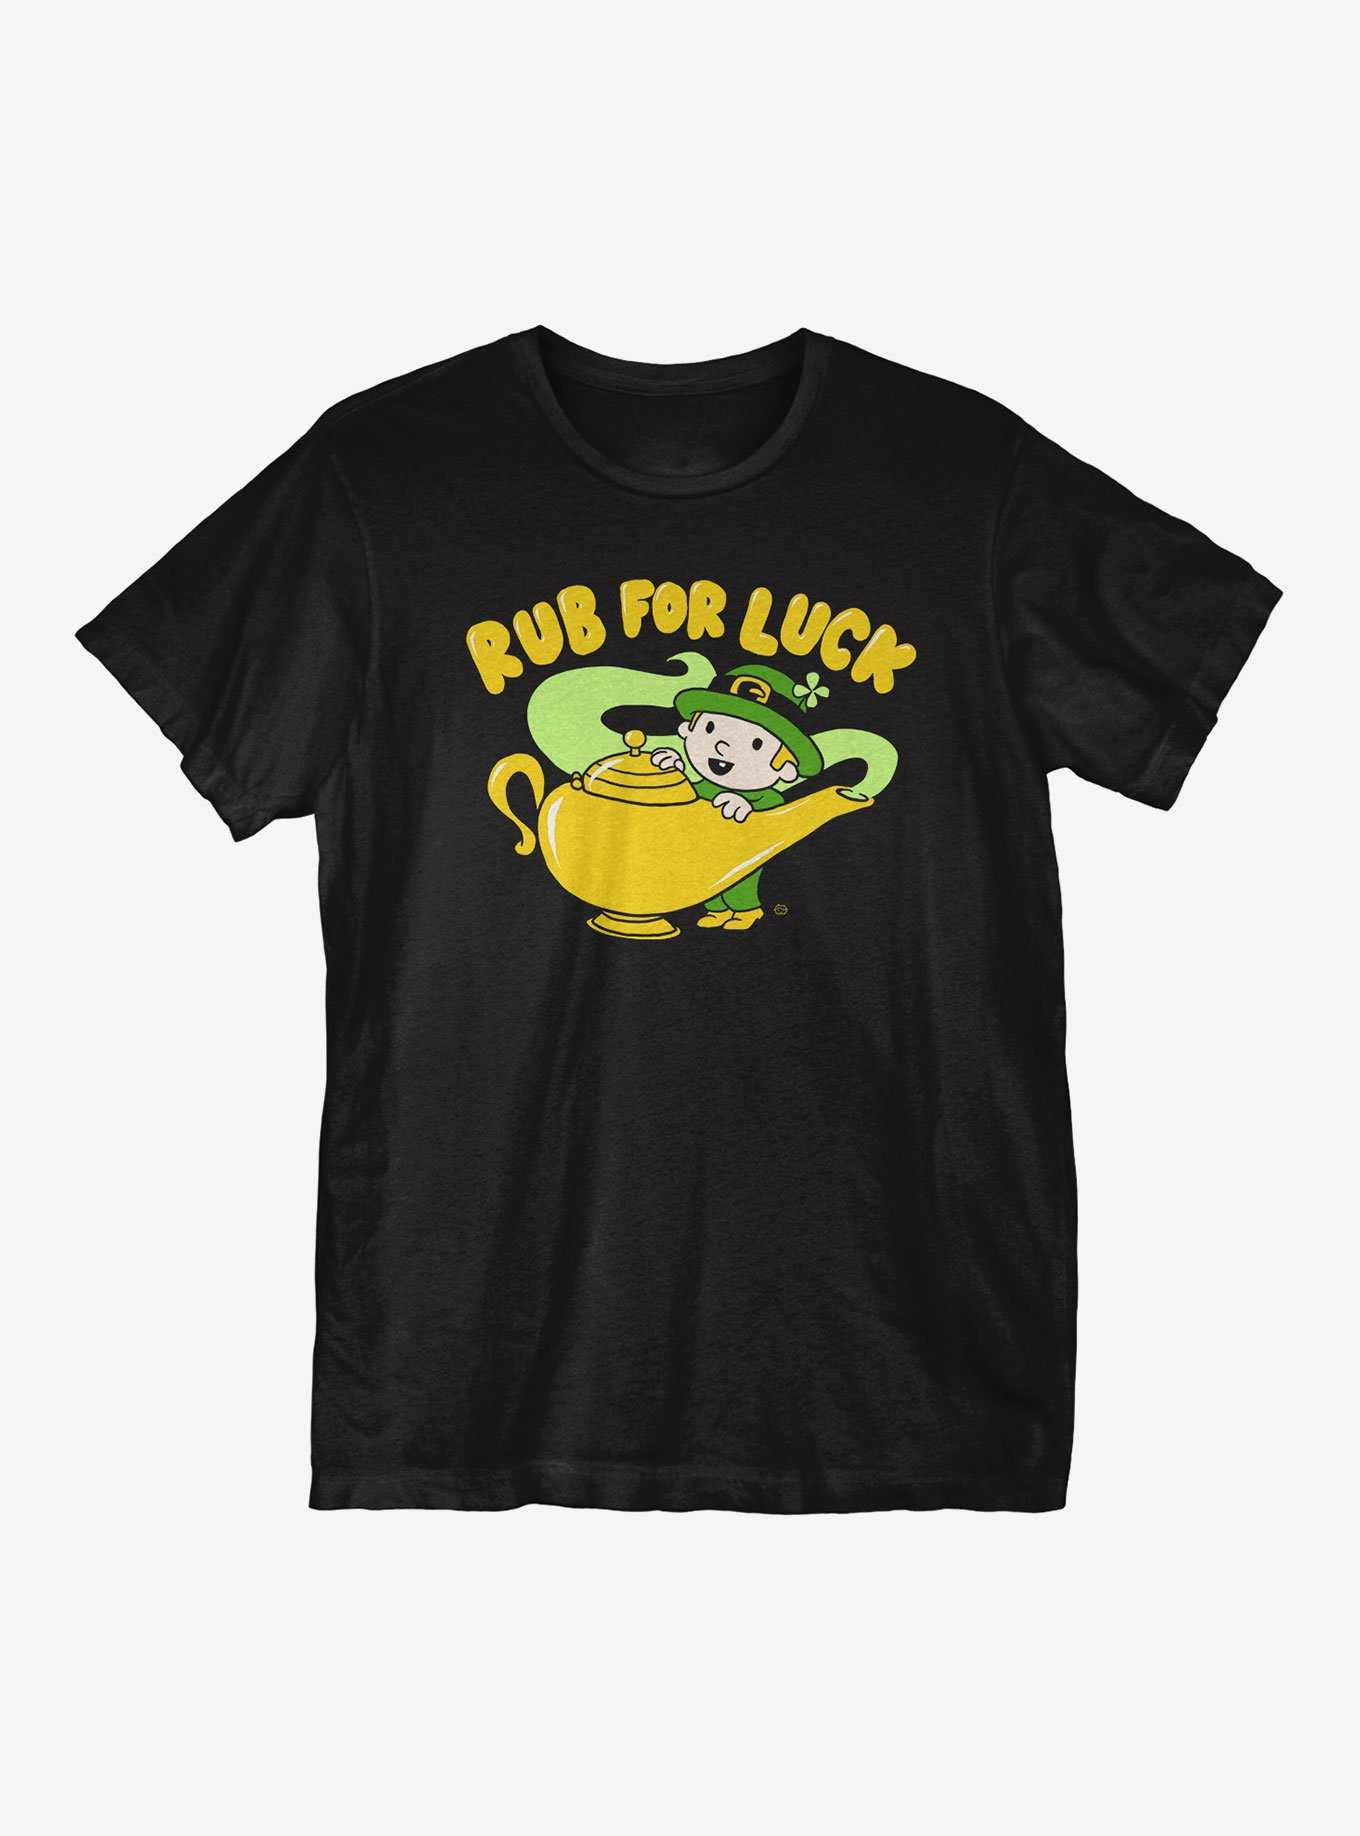 St Patrick's Day Rub for Luck T-Shirt, , hi-res